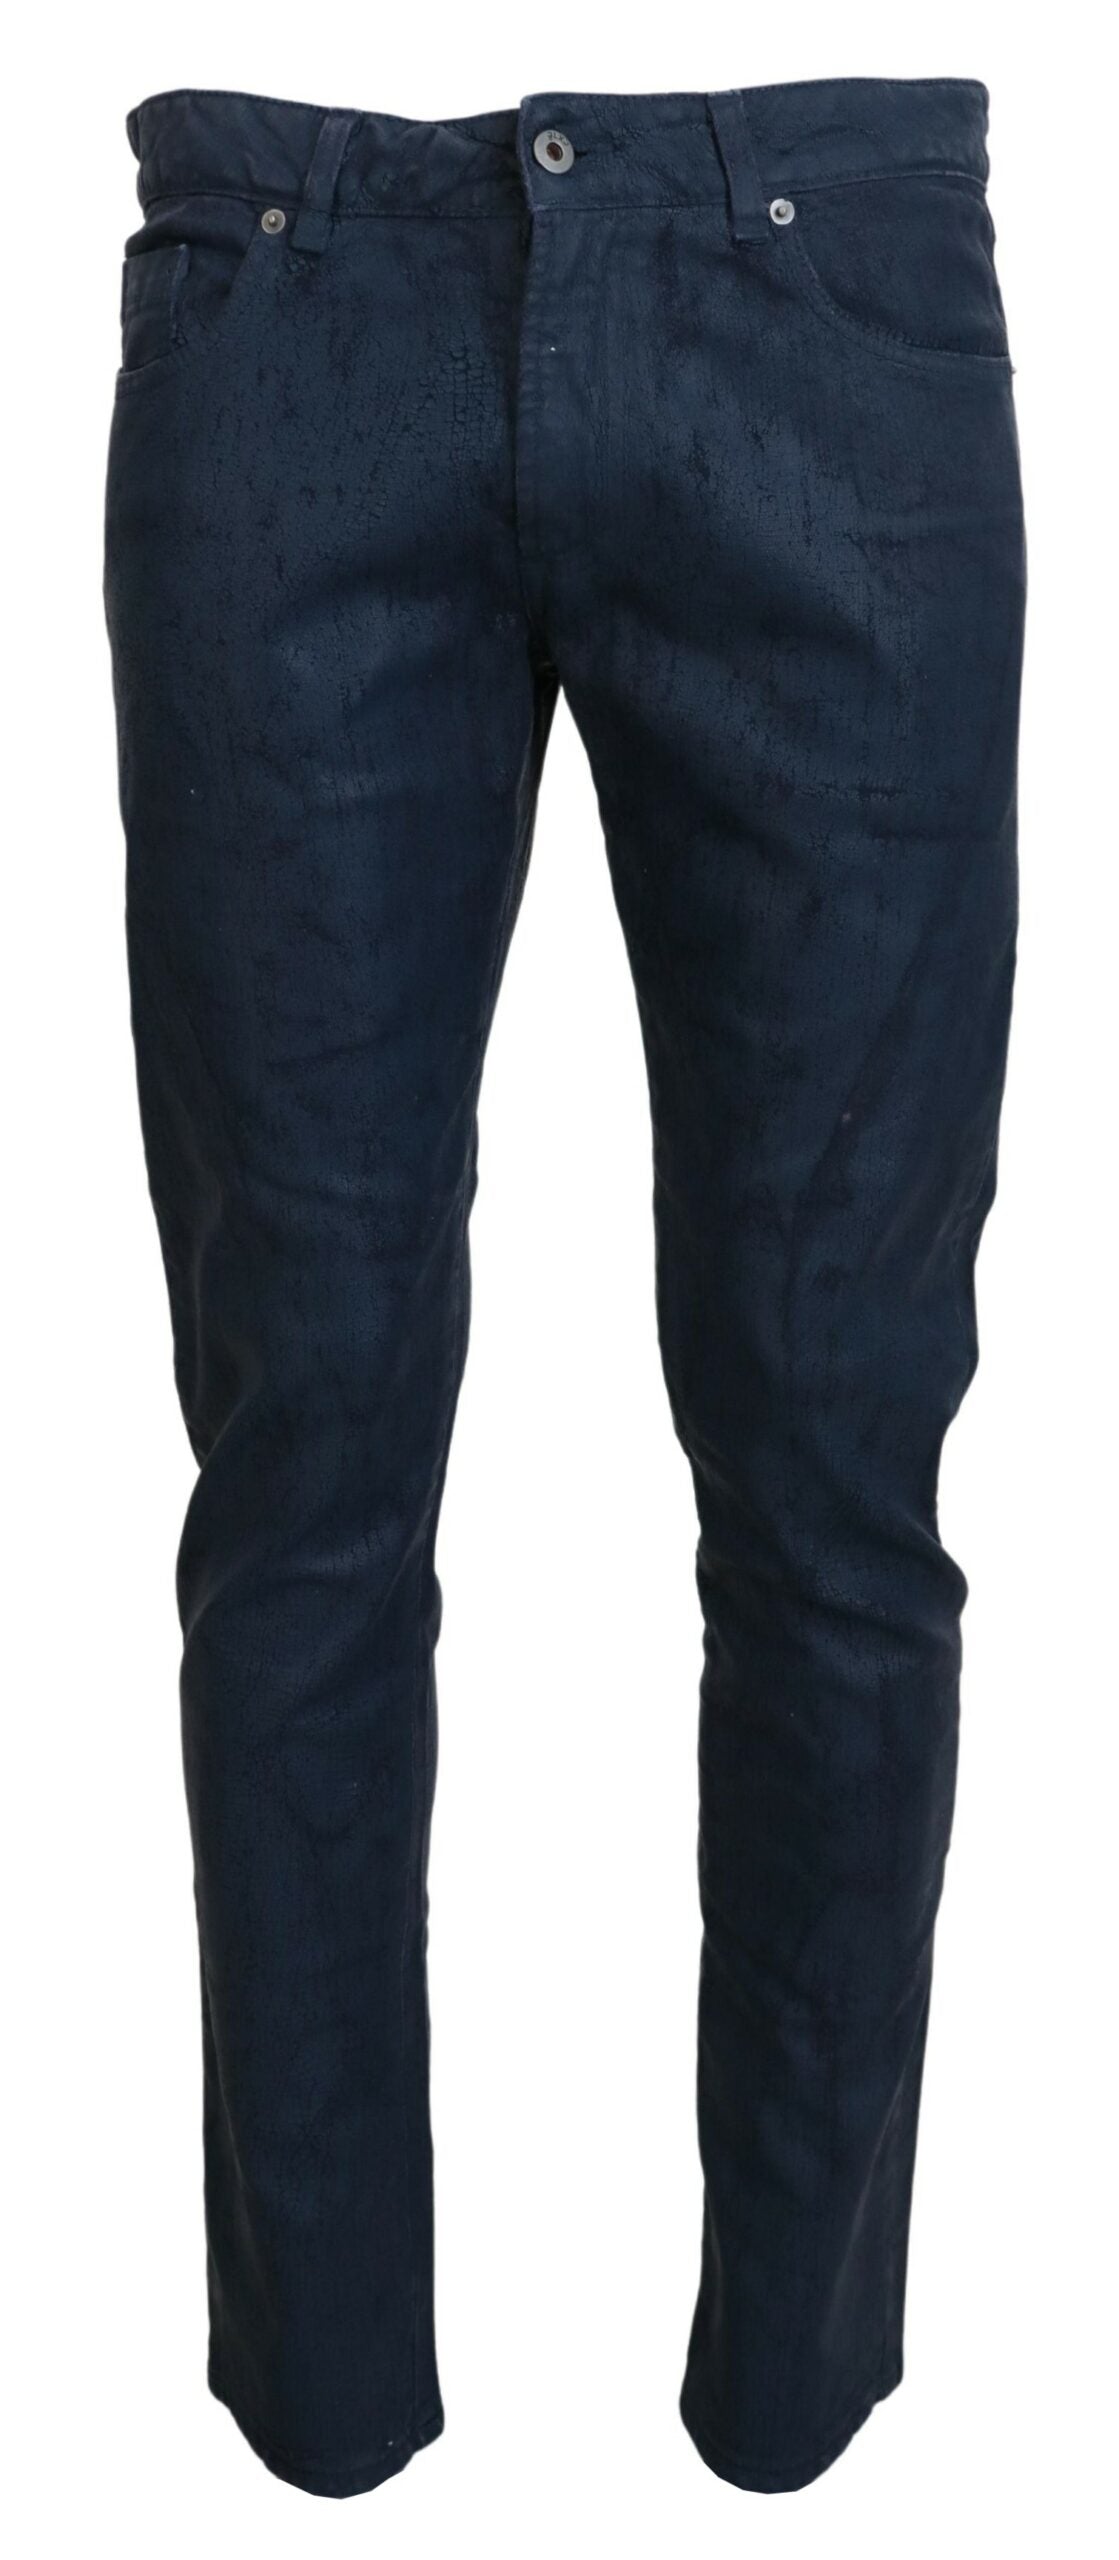 Exte Chic Tapered Blue Denim Jeans